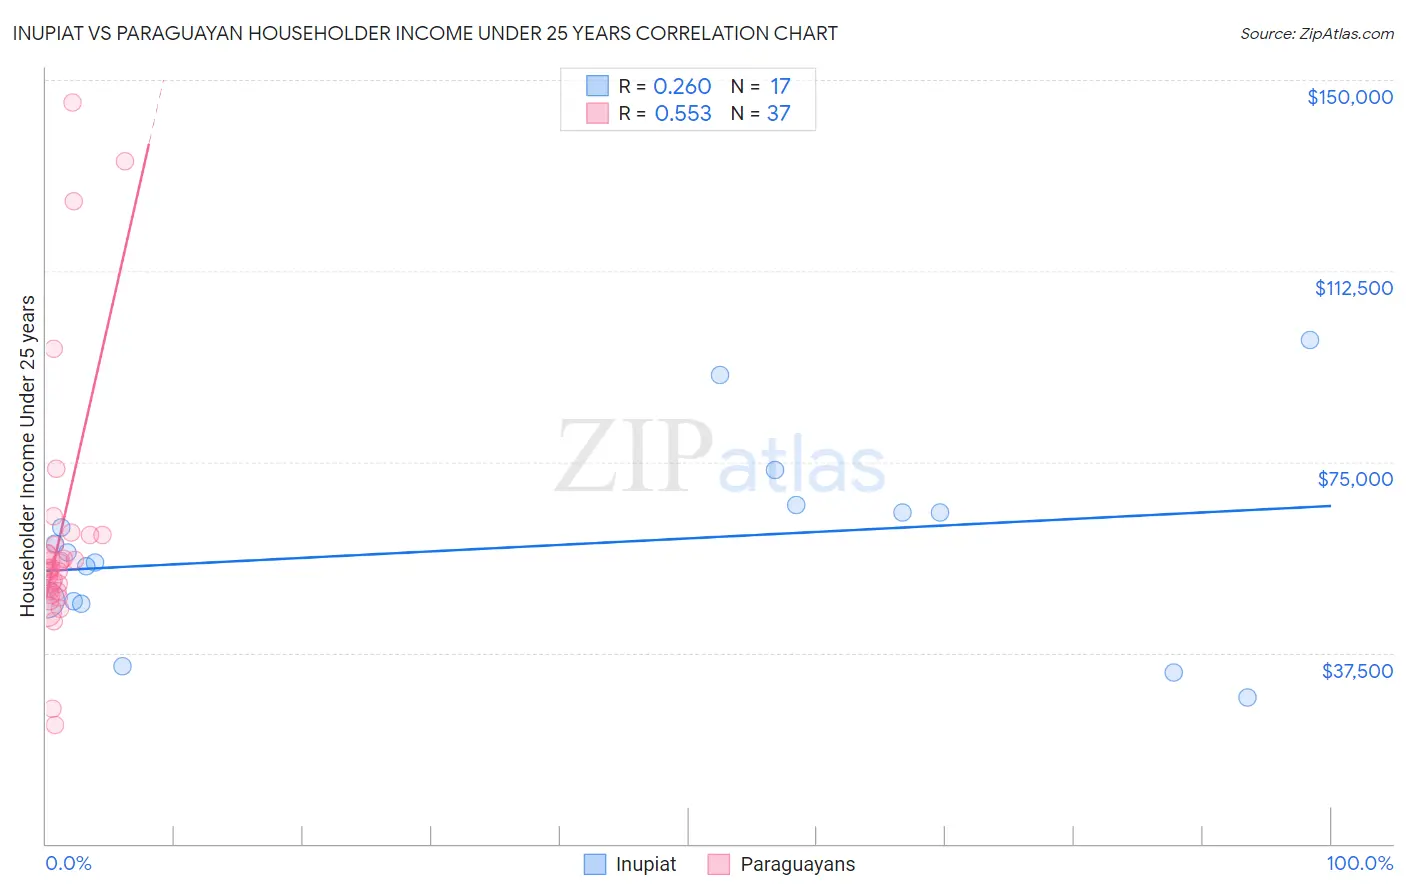 Inupiat vs Paraguayan Householder Income Under 25 years